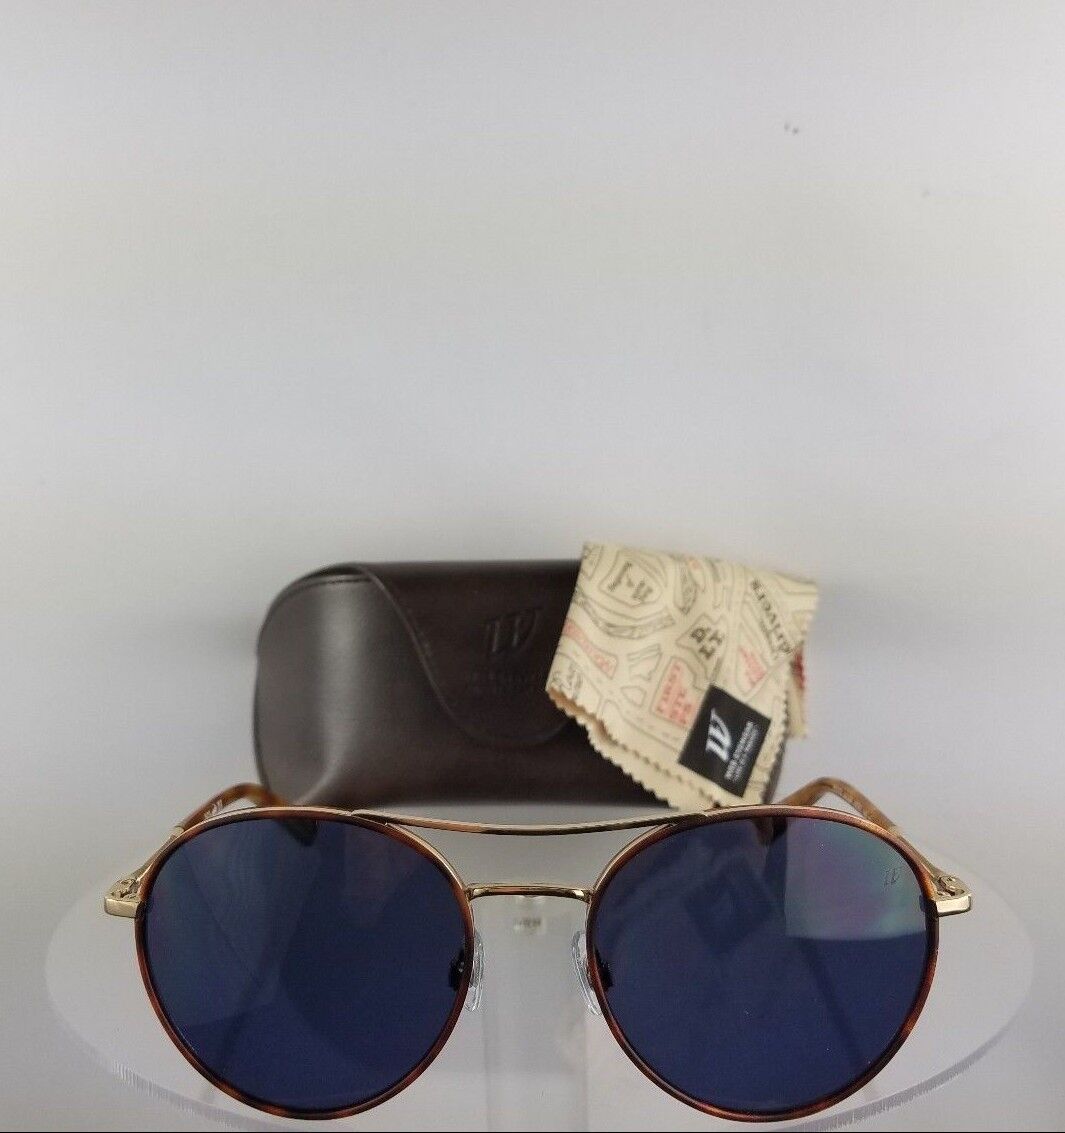 Brand New Authentic Web Sunglasses WE 0162 Col. 32P Gold 57mm 162 Frame